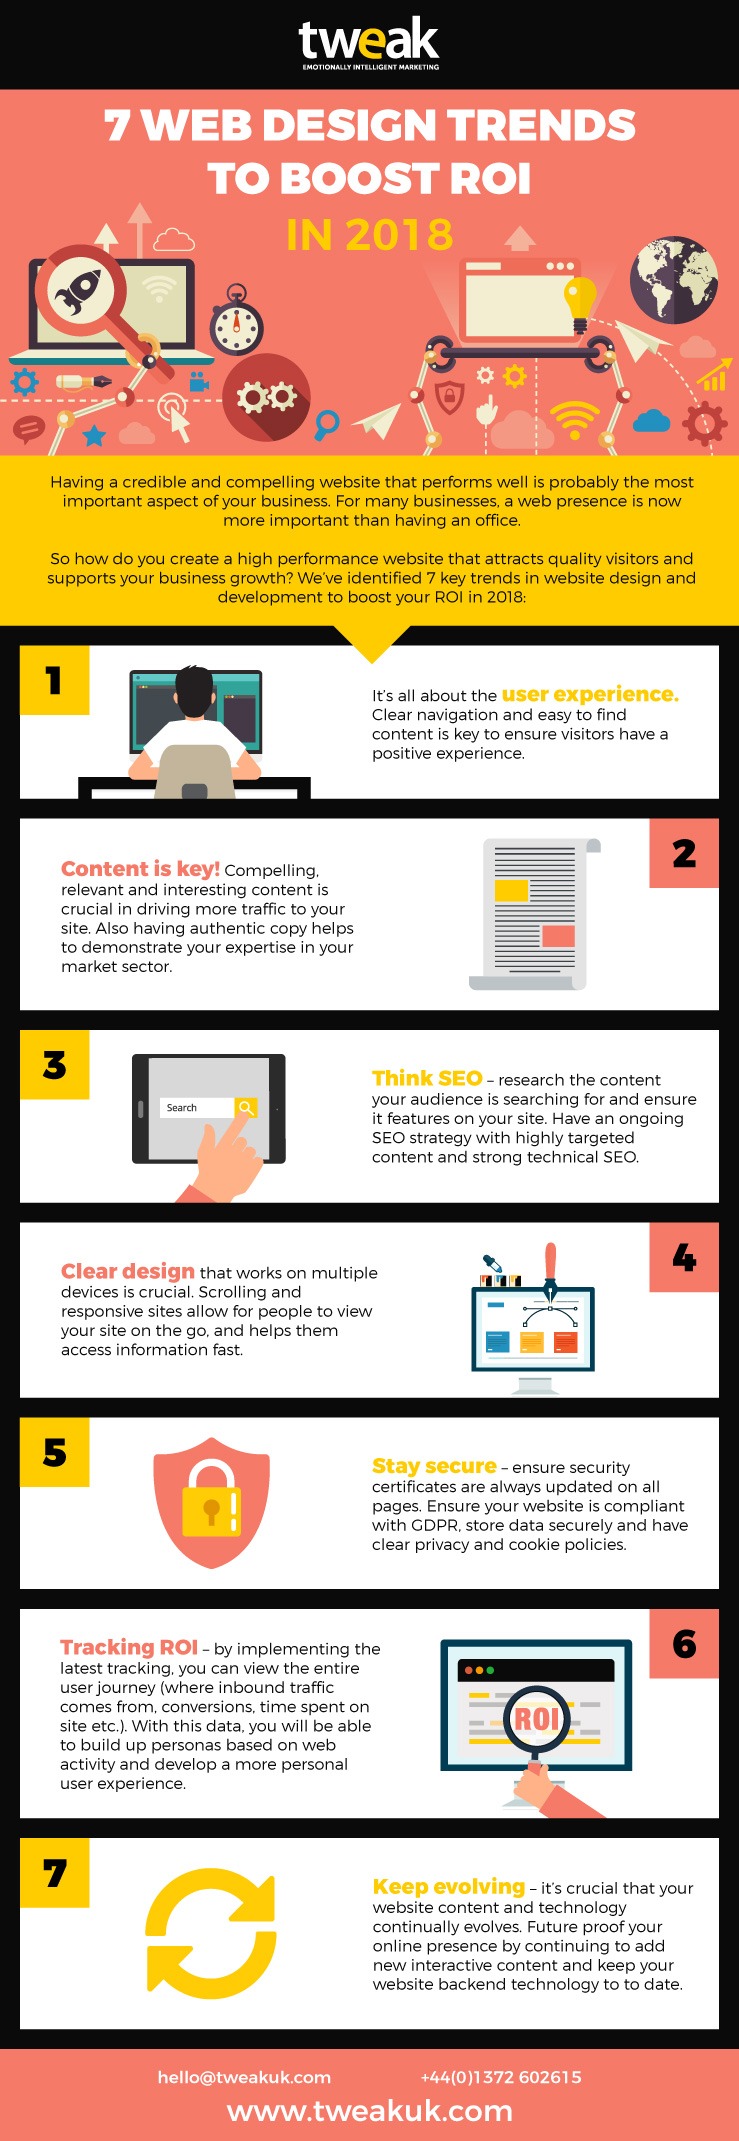 Infographic about Web Design trends in 2018 for tweak marketing blog on web design trends to boost ROI in 2018